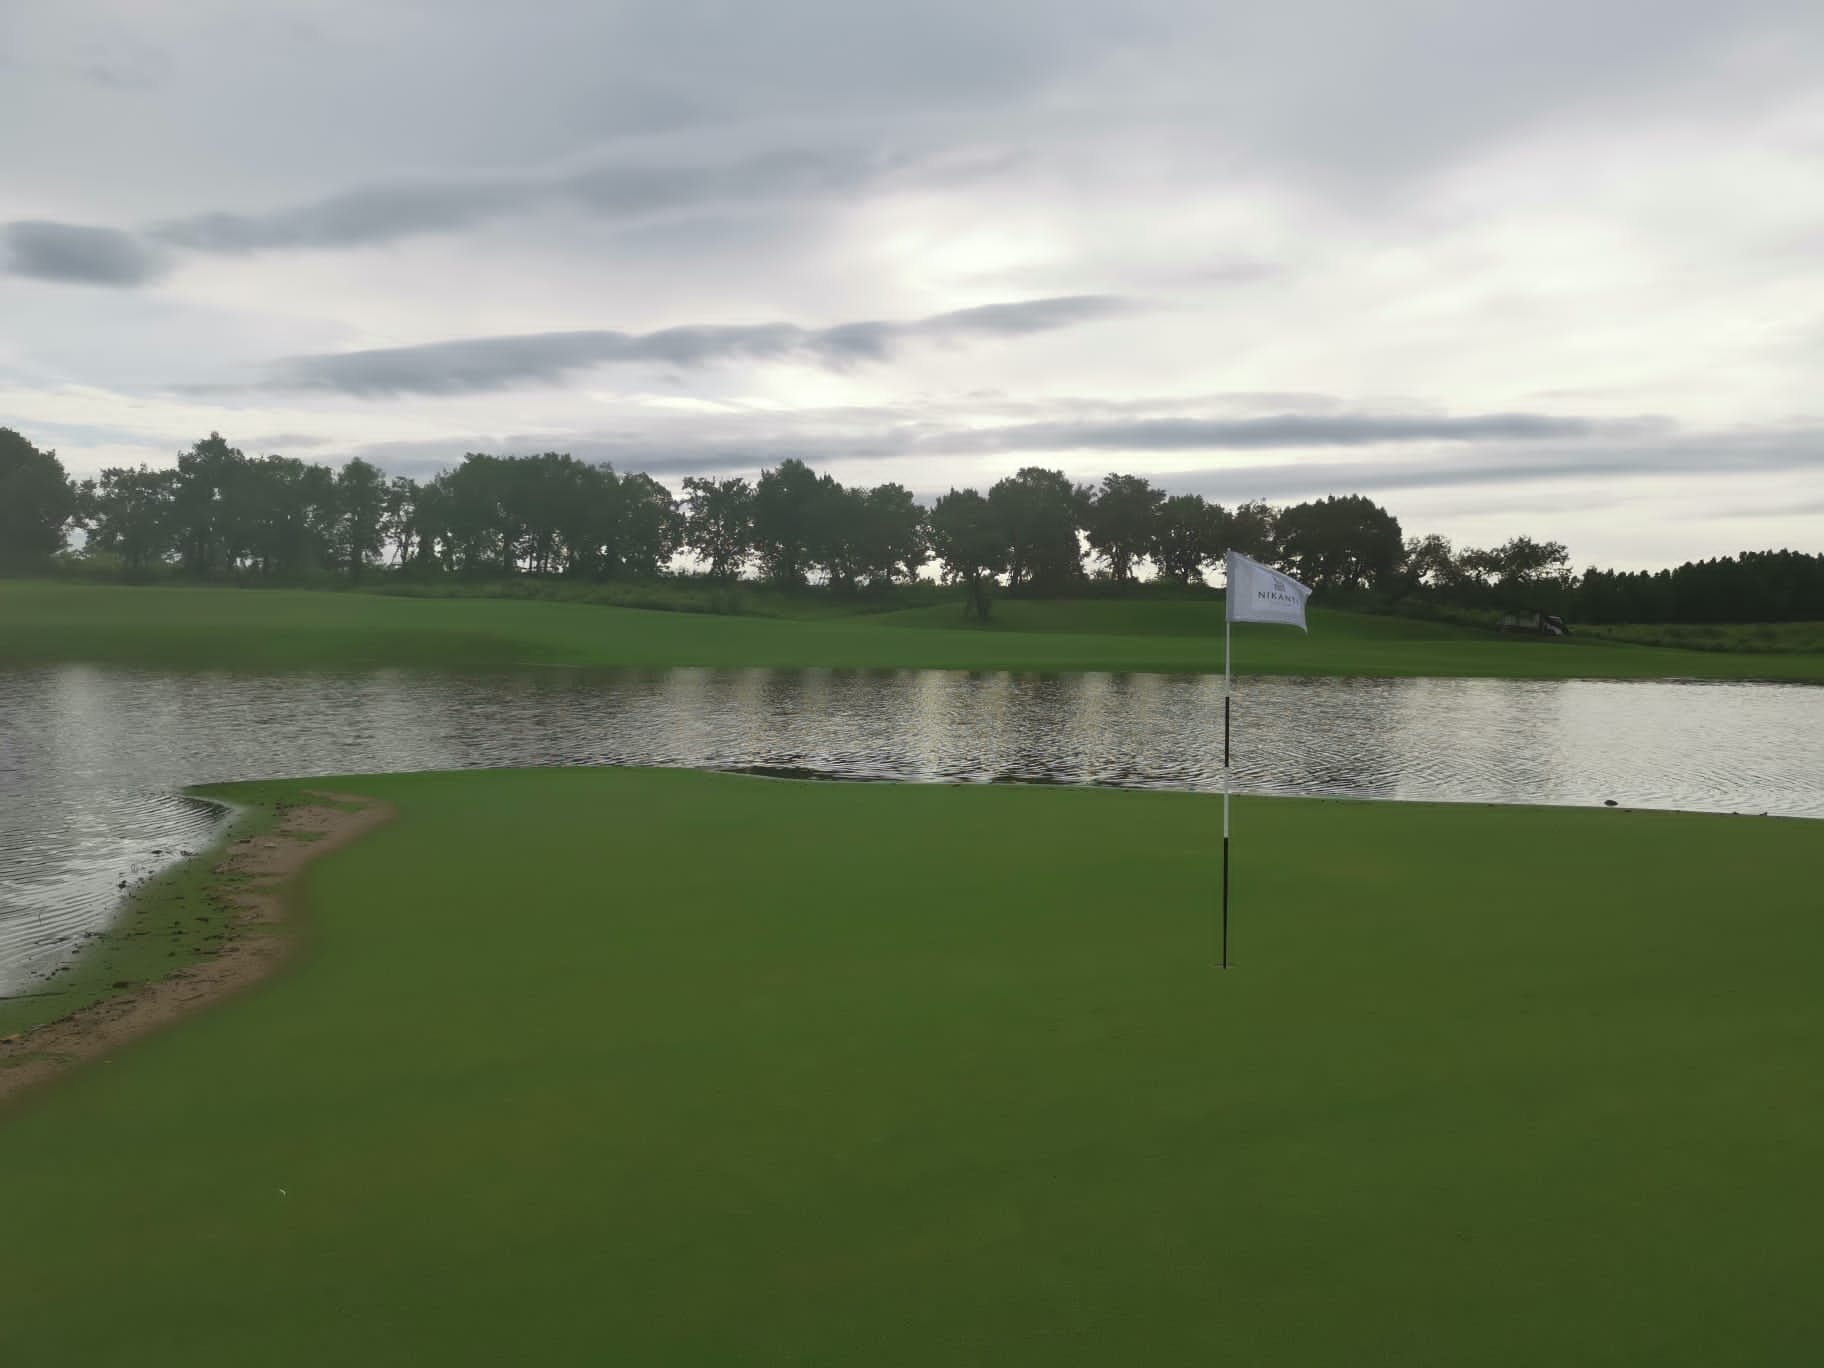  The 3rd green partially submerged due to the rising lake levels from the heavy, persistent rain. 